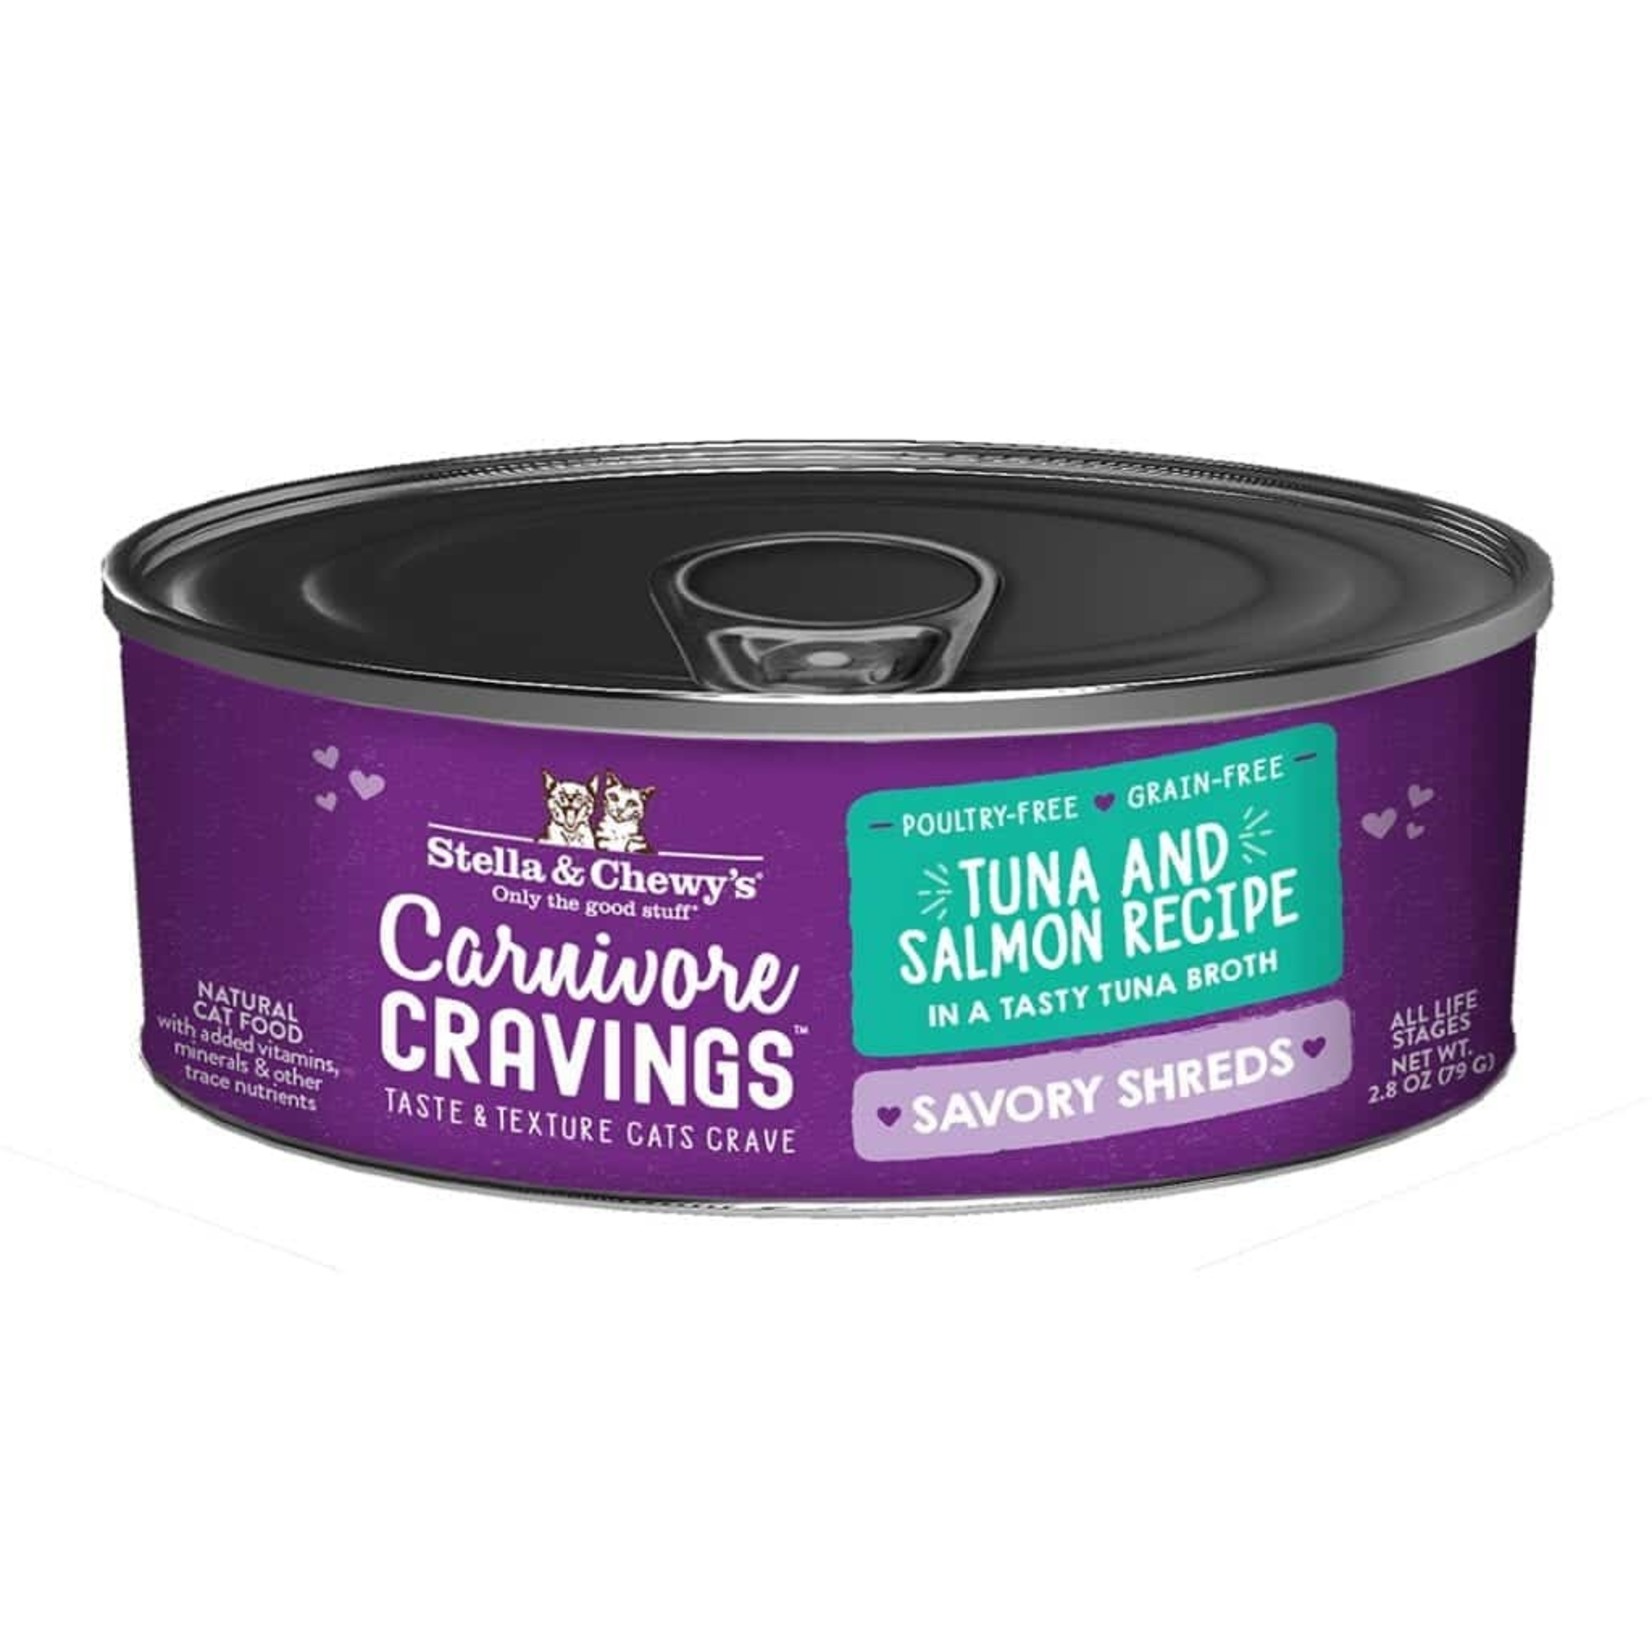 Stella and Chewys Stella & Chewy's Wet Cat Food Carnivore Cravings Savory Shreds Tuna & Salmon Recipe 2.8oz Can Grain Free